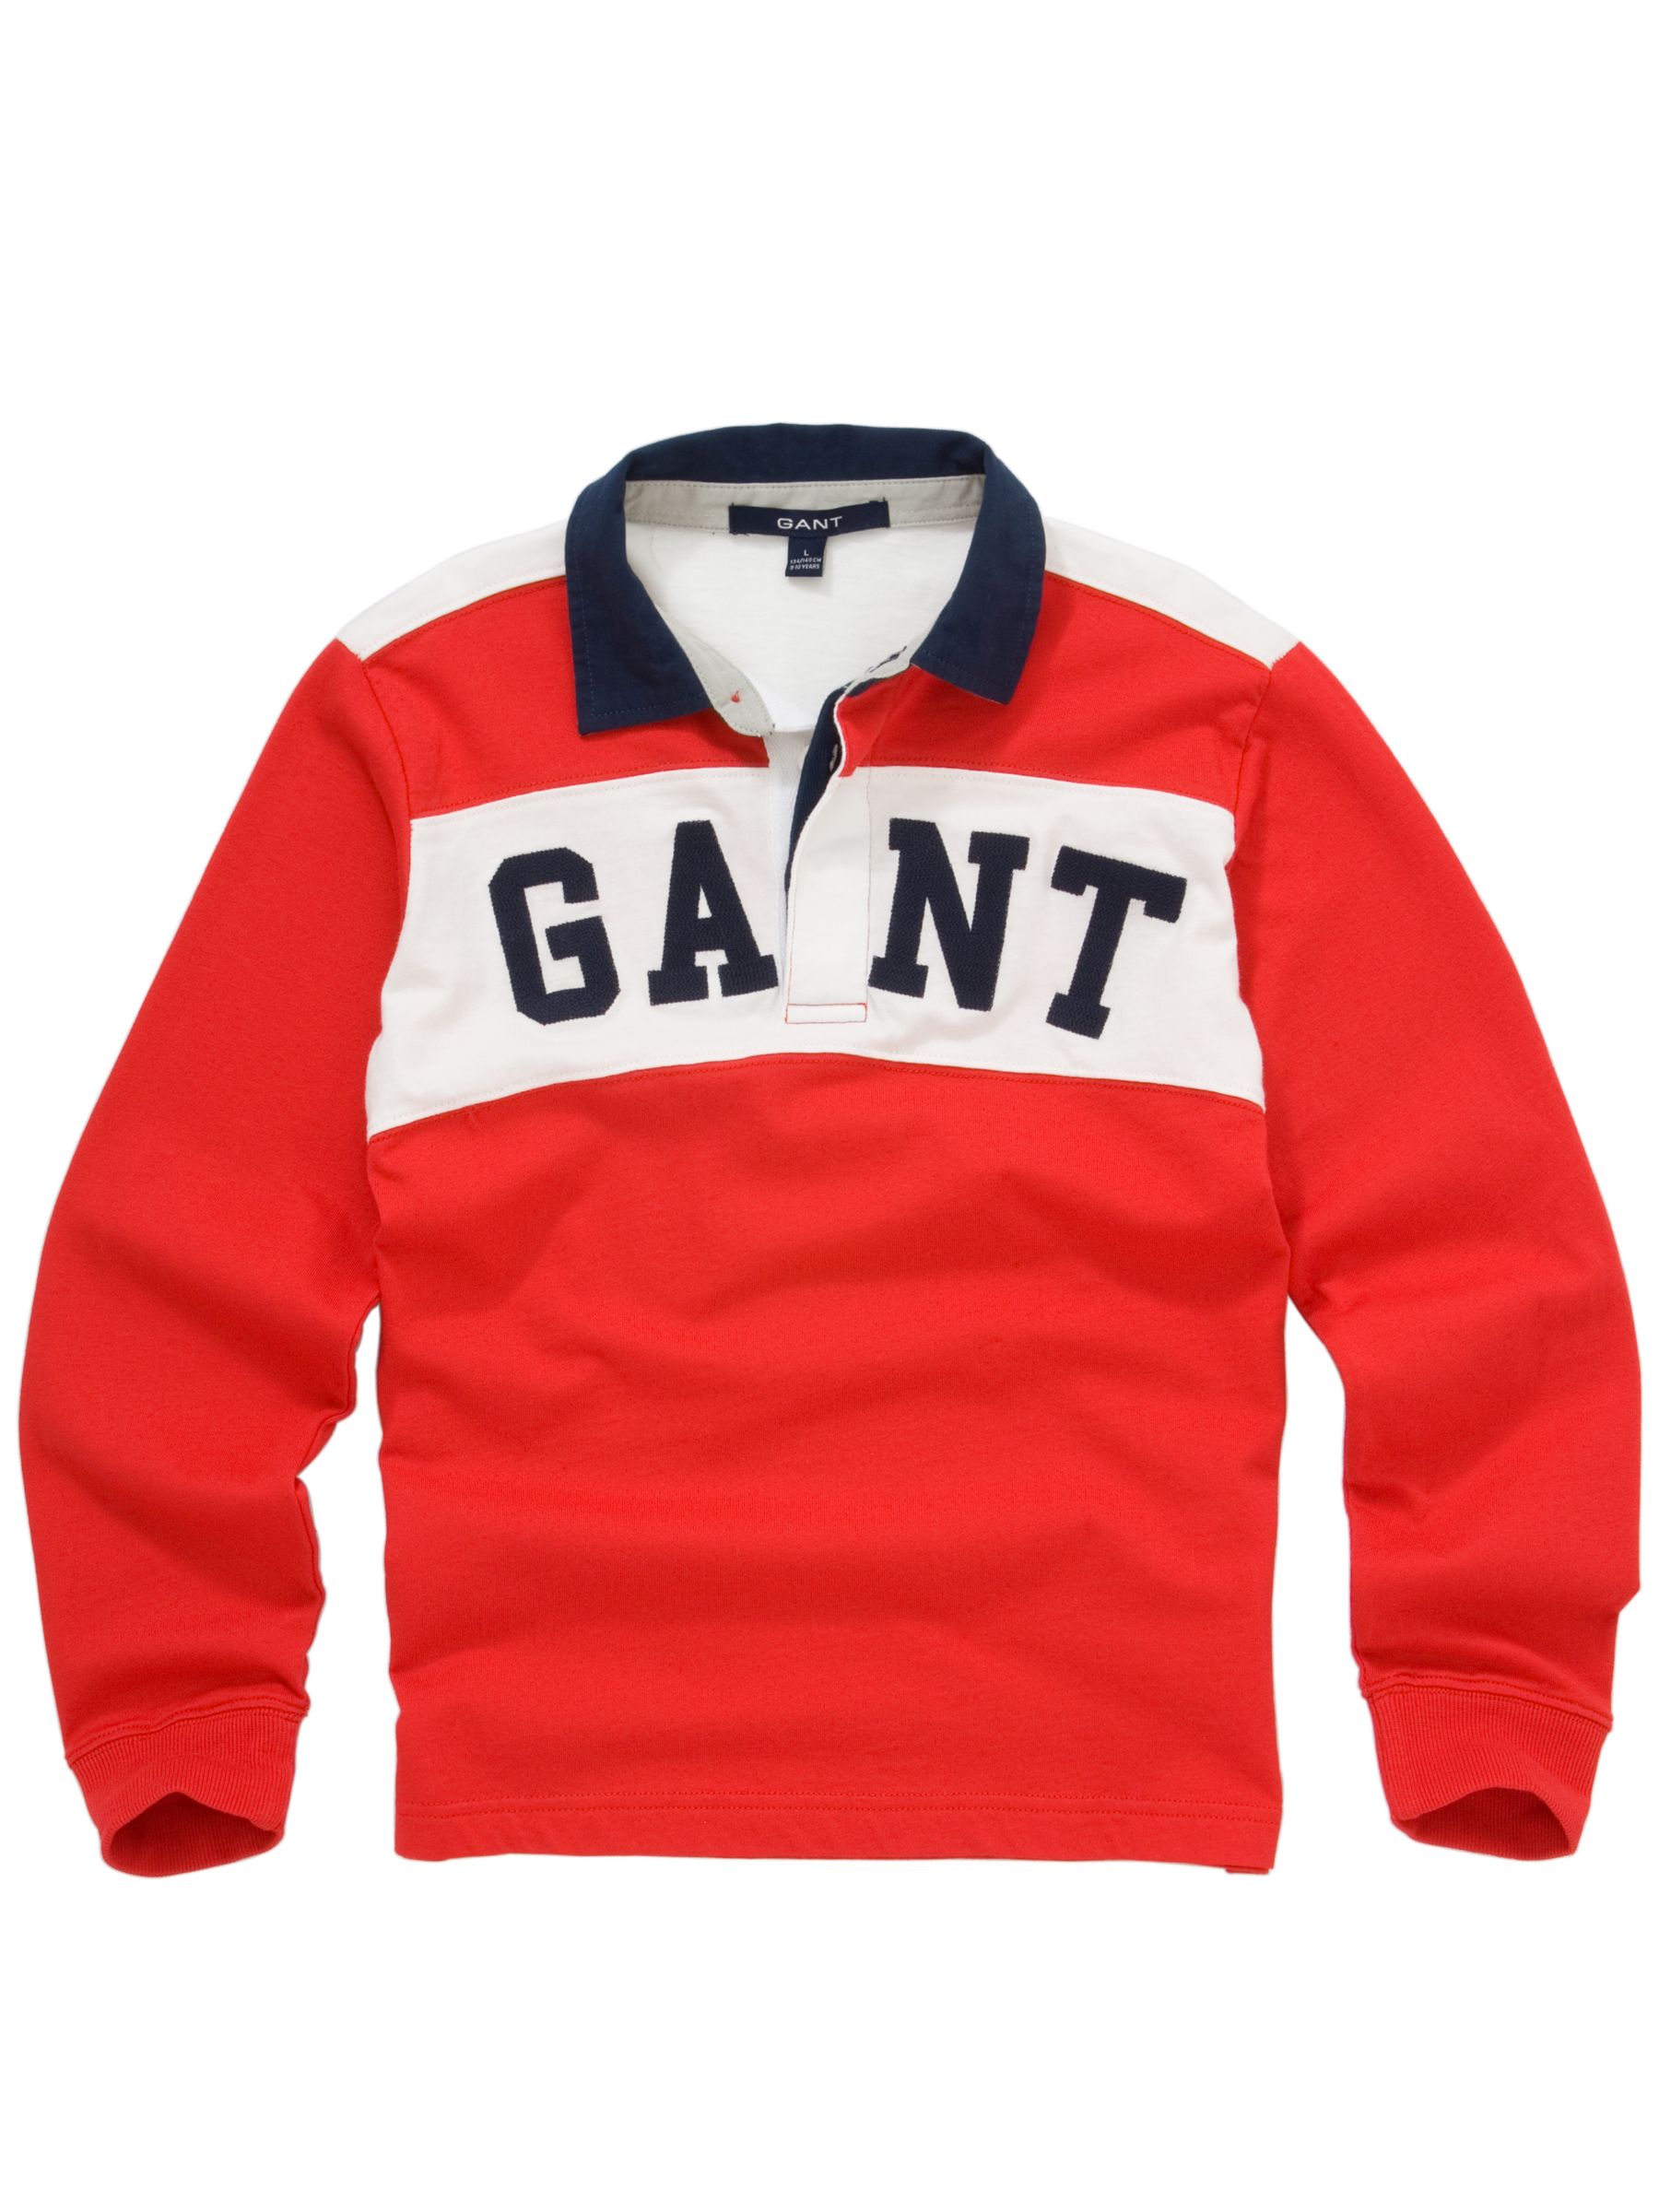 Gant Heavy Rugby Shirt, Red